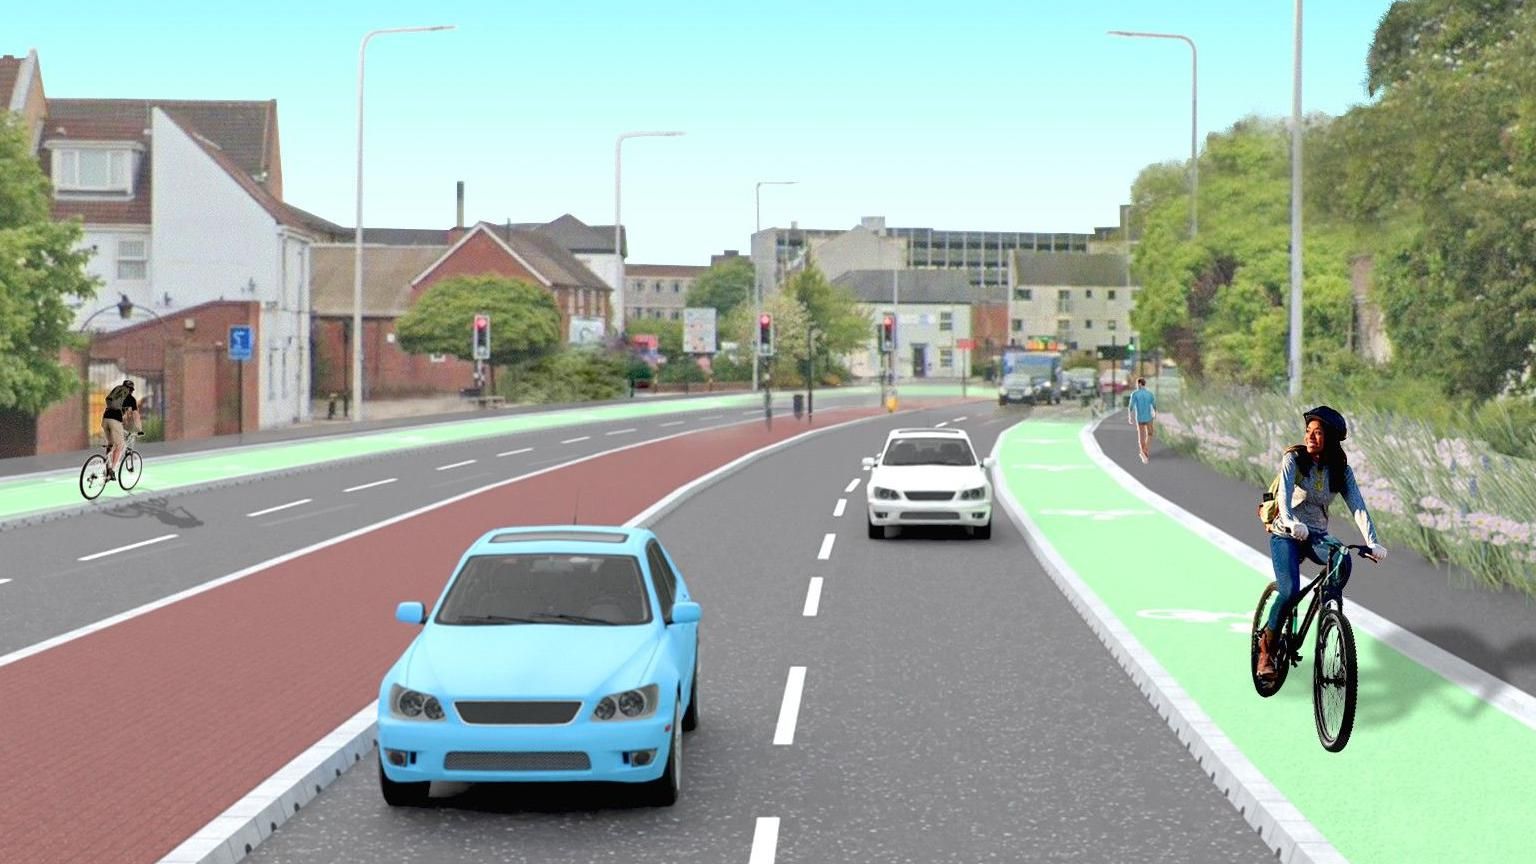 Artist's impression of the new road layout